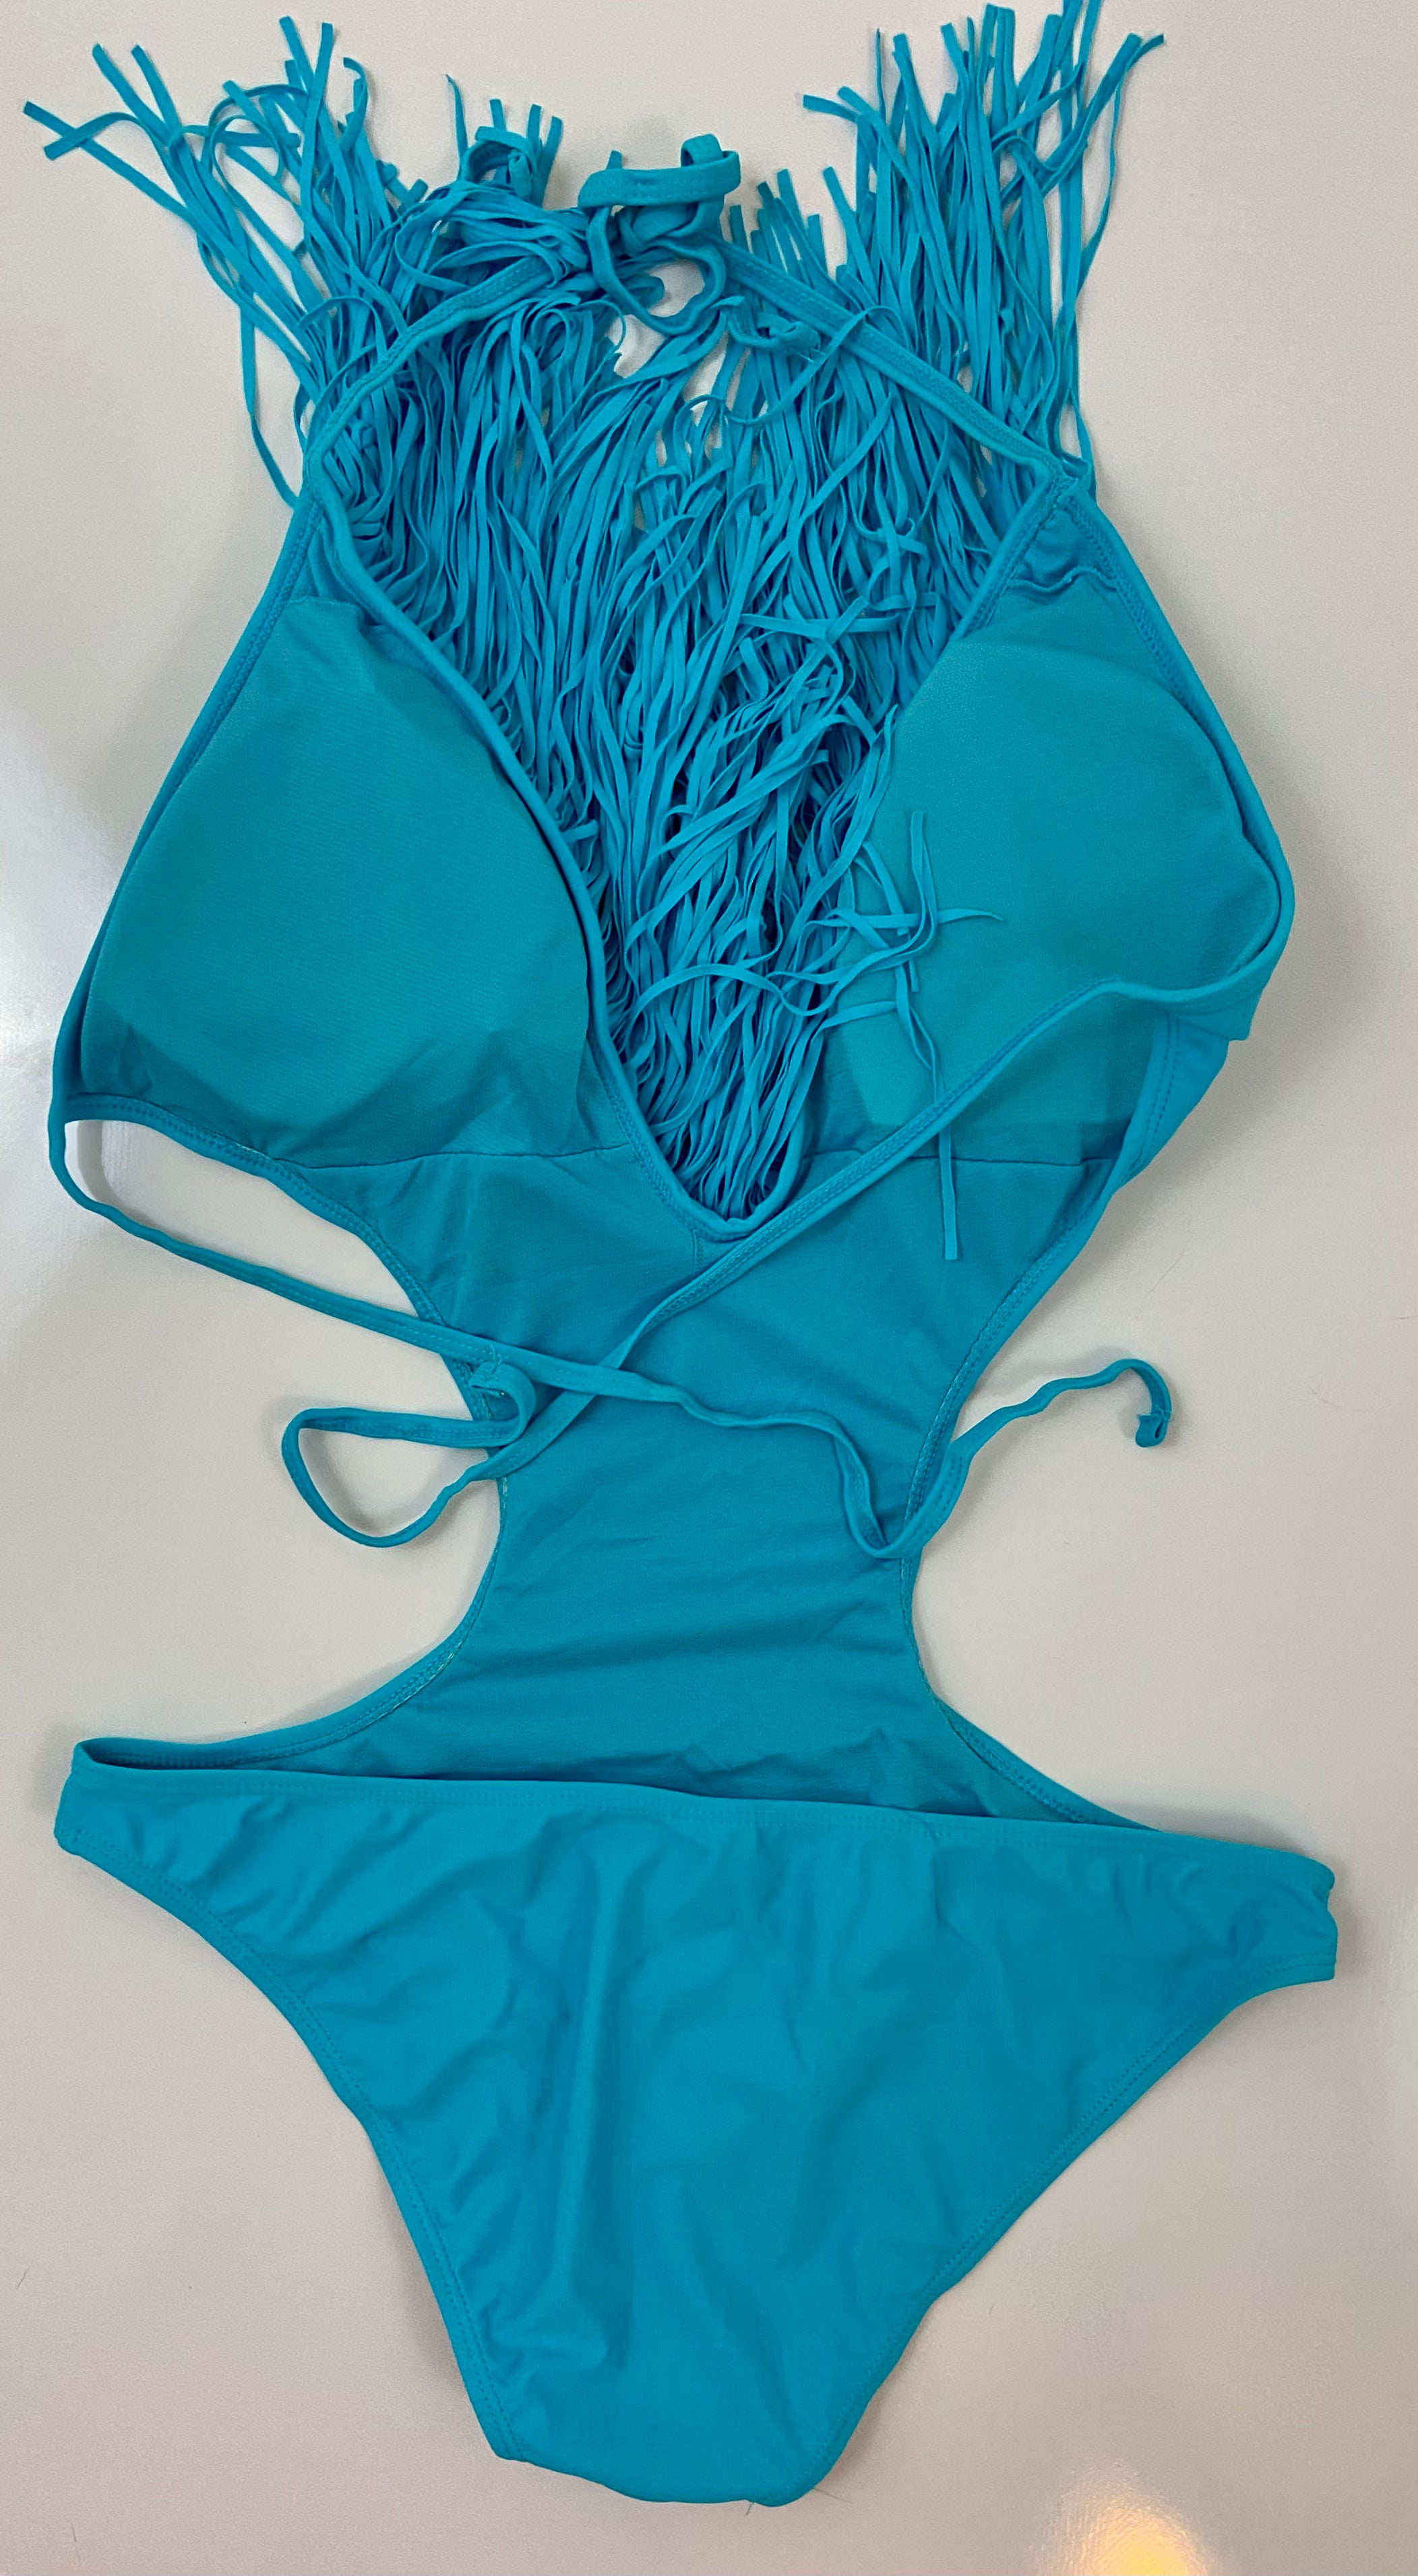 One piece swimming suit